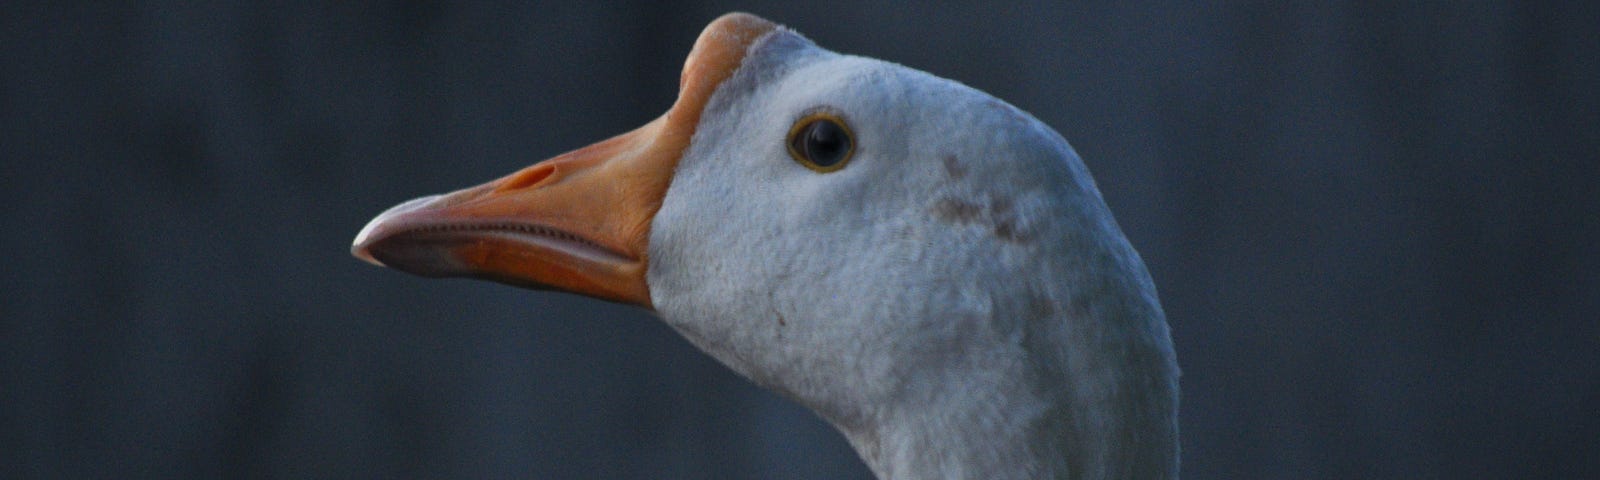 A duck image